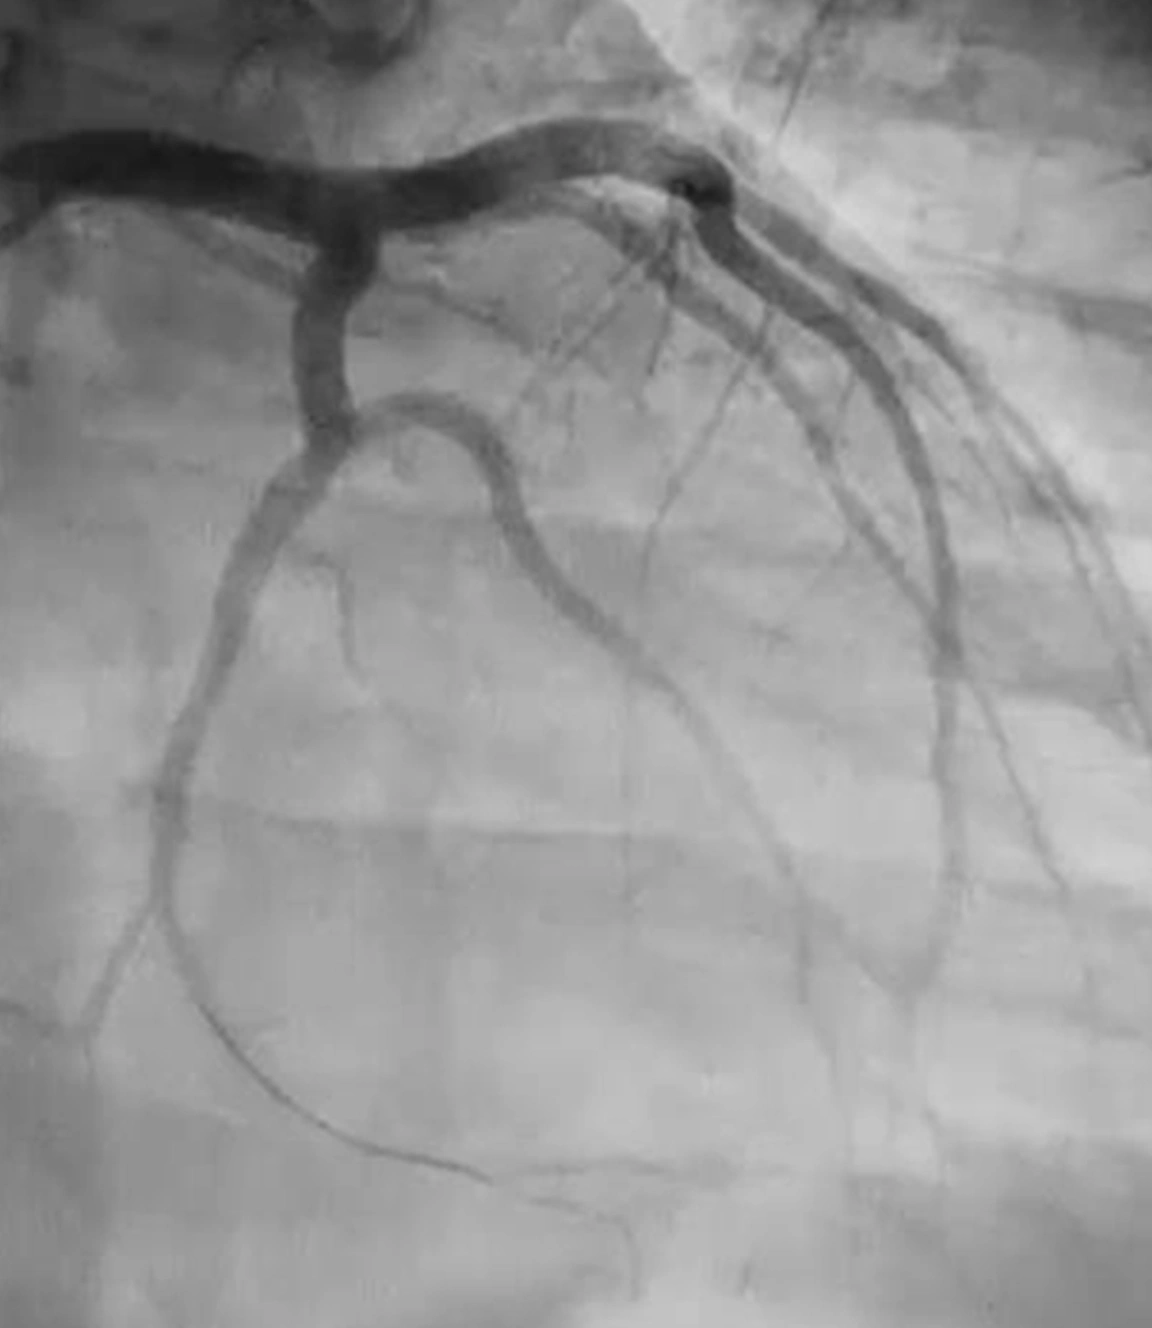 Angiogram of restored flow in left circumflex artery after CAT RX clot removal